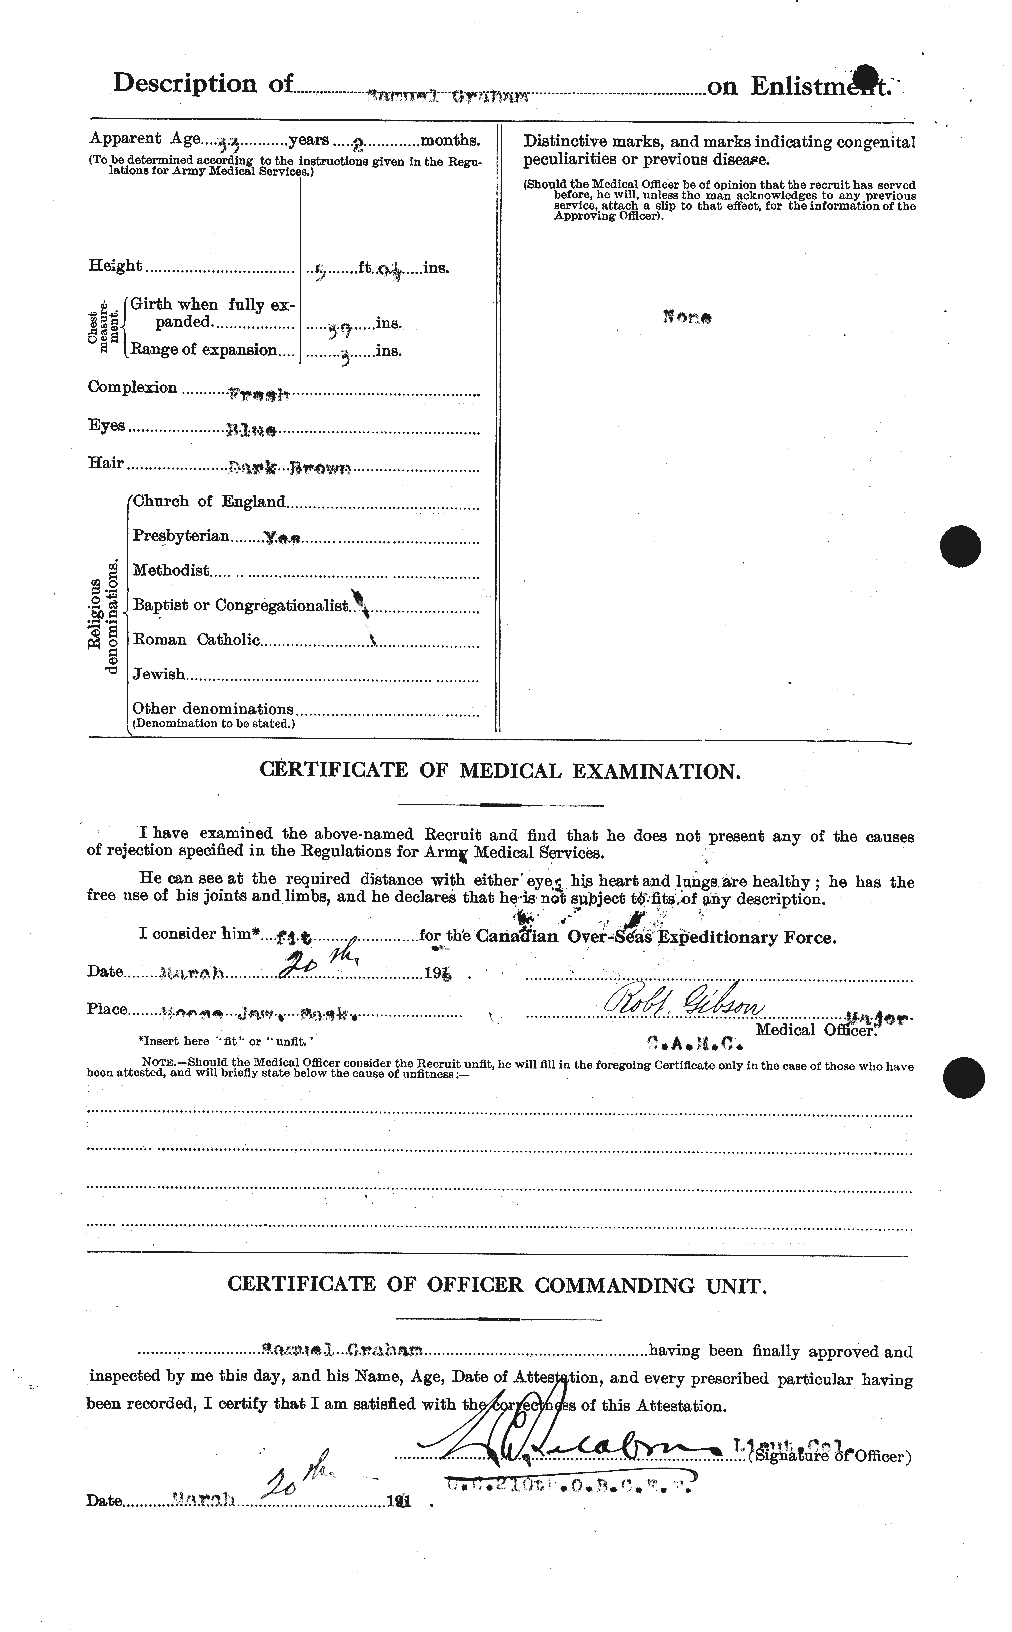 Personnel Records of the First World War - CEF 359452b